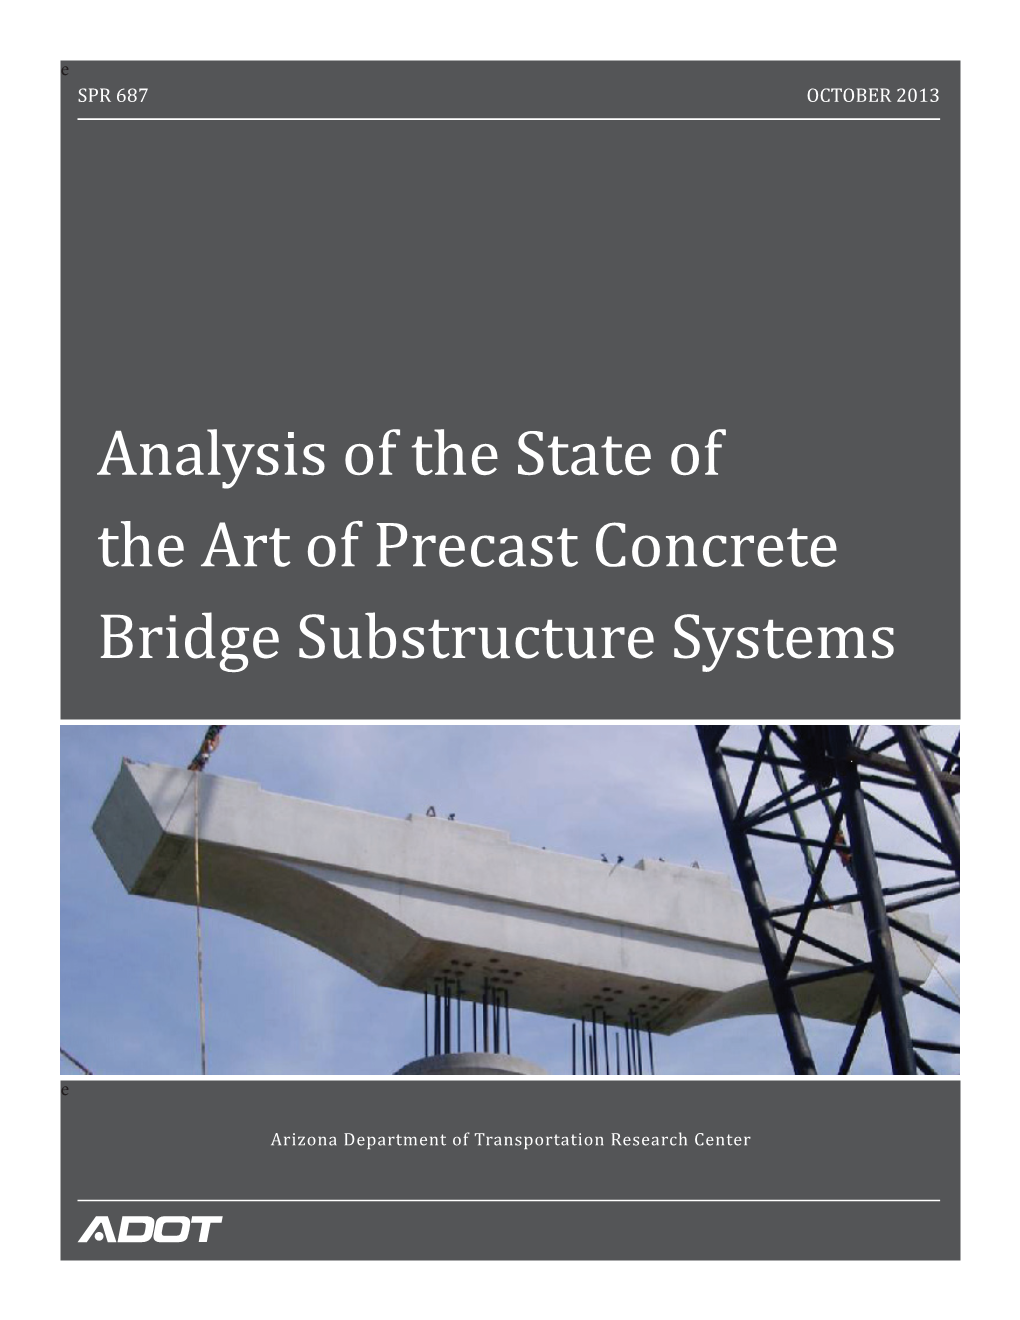 Analysis of the State of the Art of Precast Concrete Bridge Substructure Systems